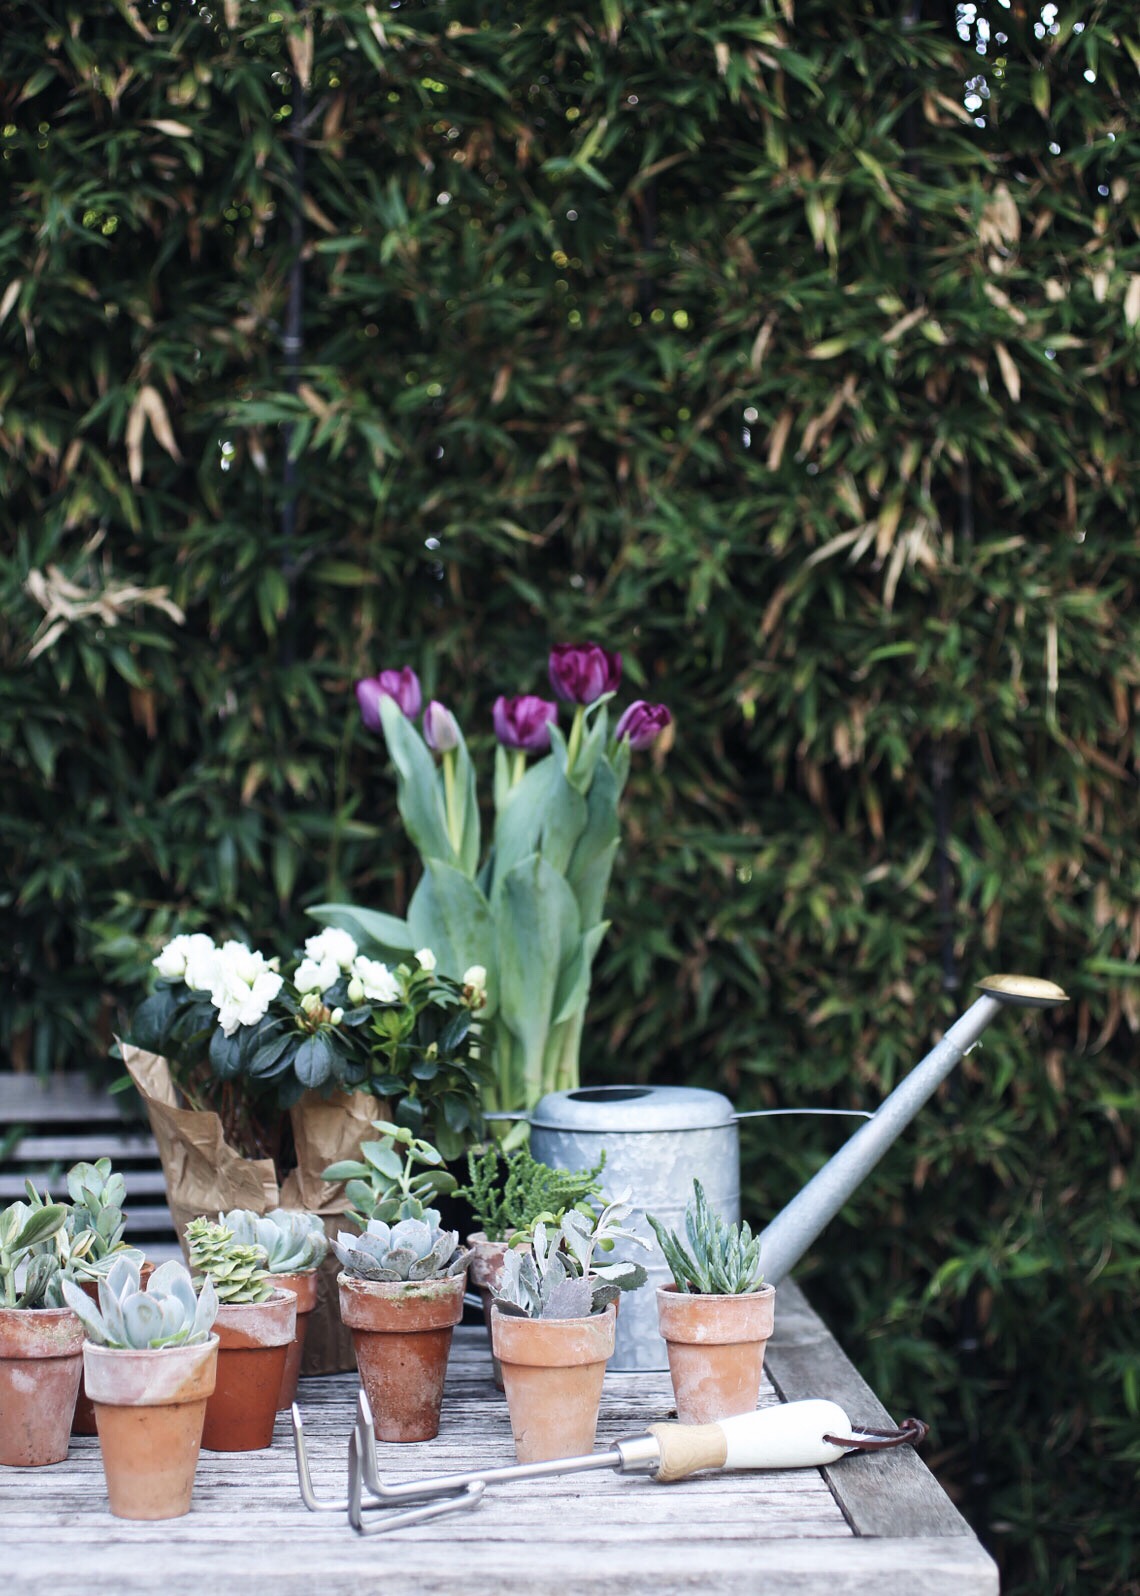 spring cleaning + planting via @citysage